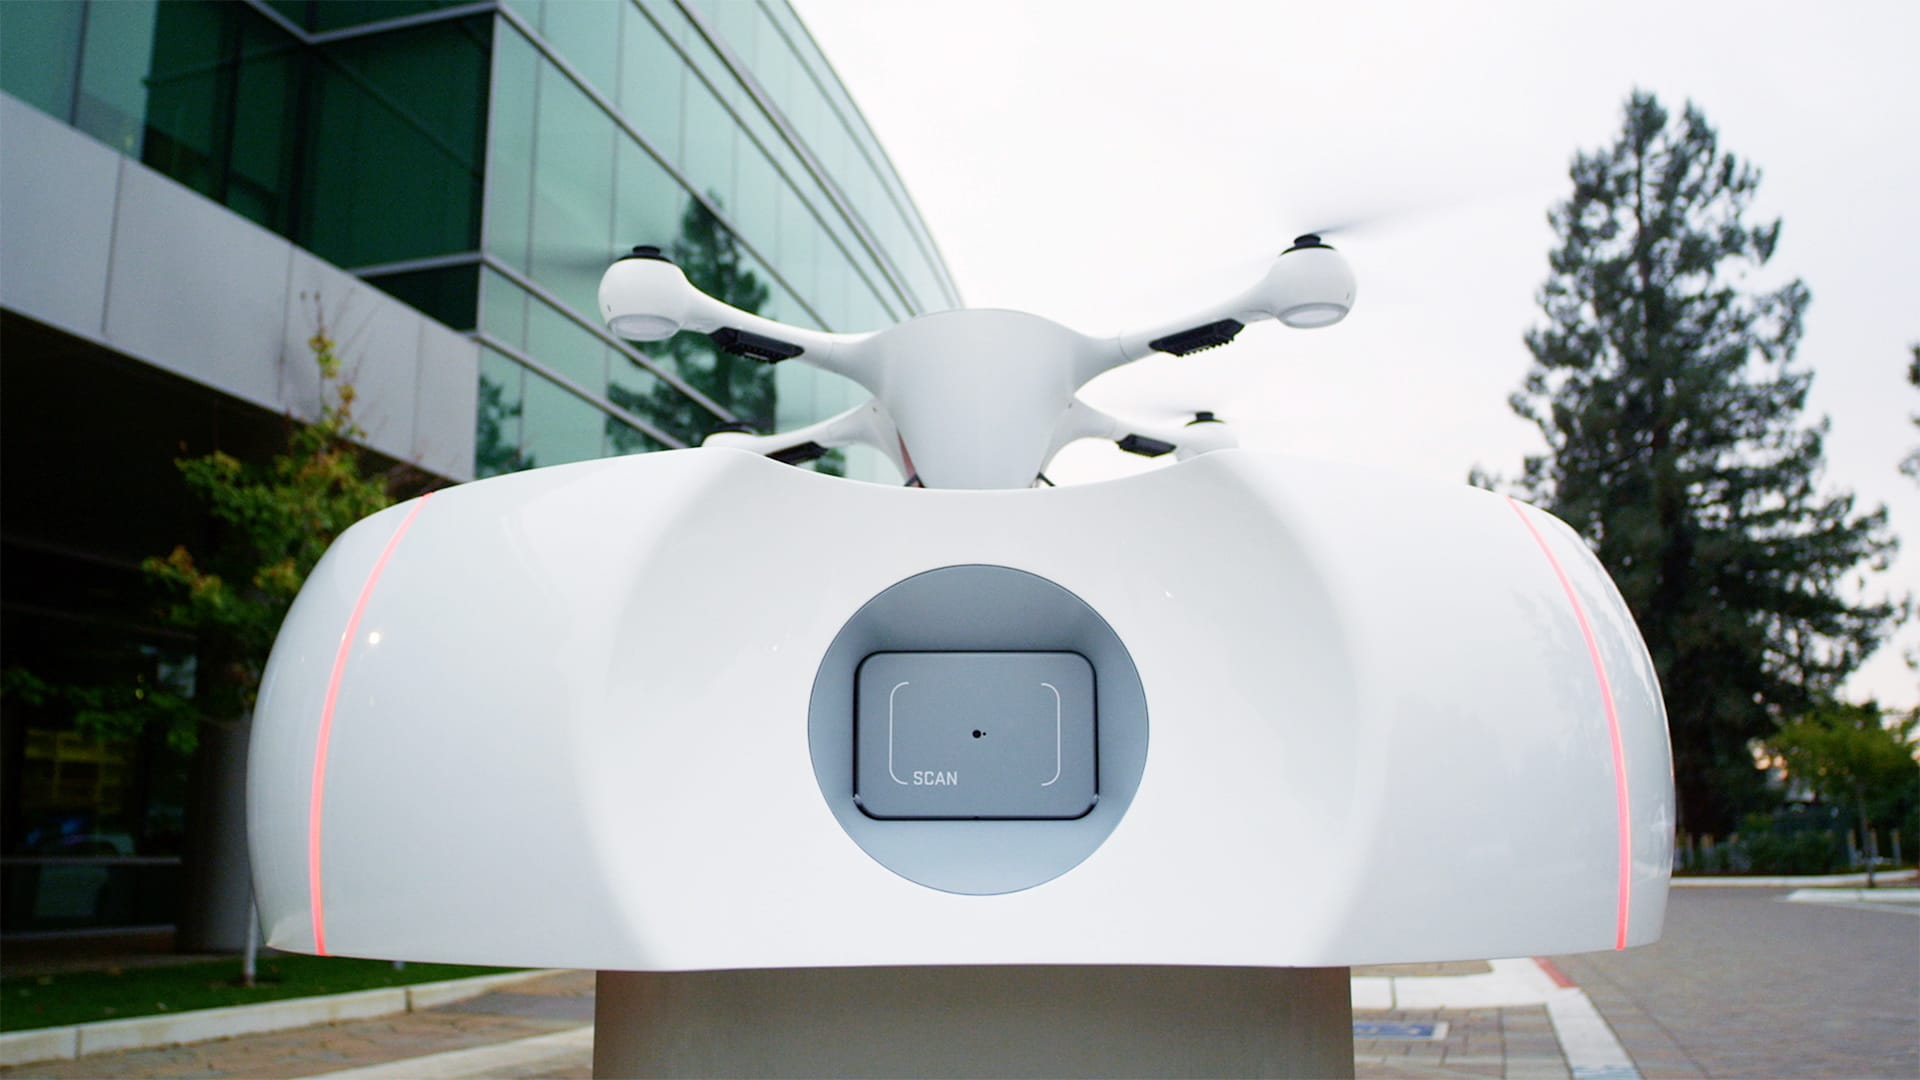 Switzerland Is Getting A Network Of Medical Delivery Drones